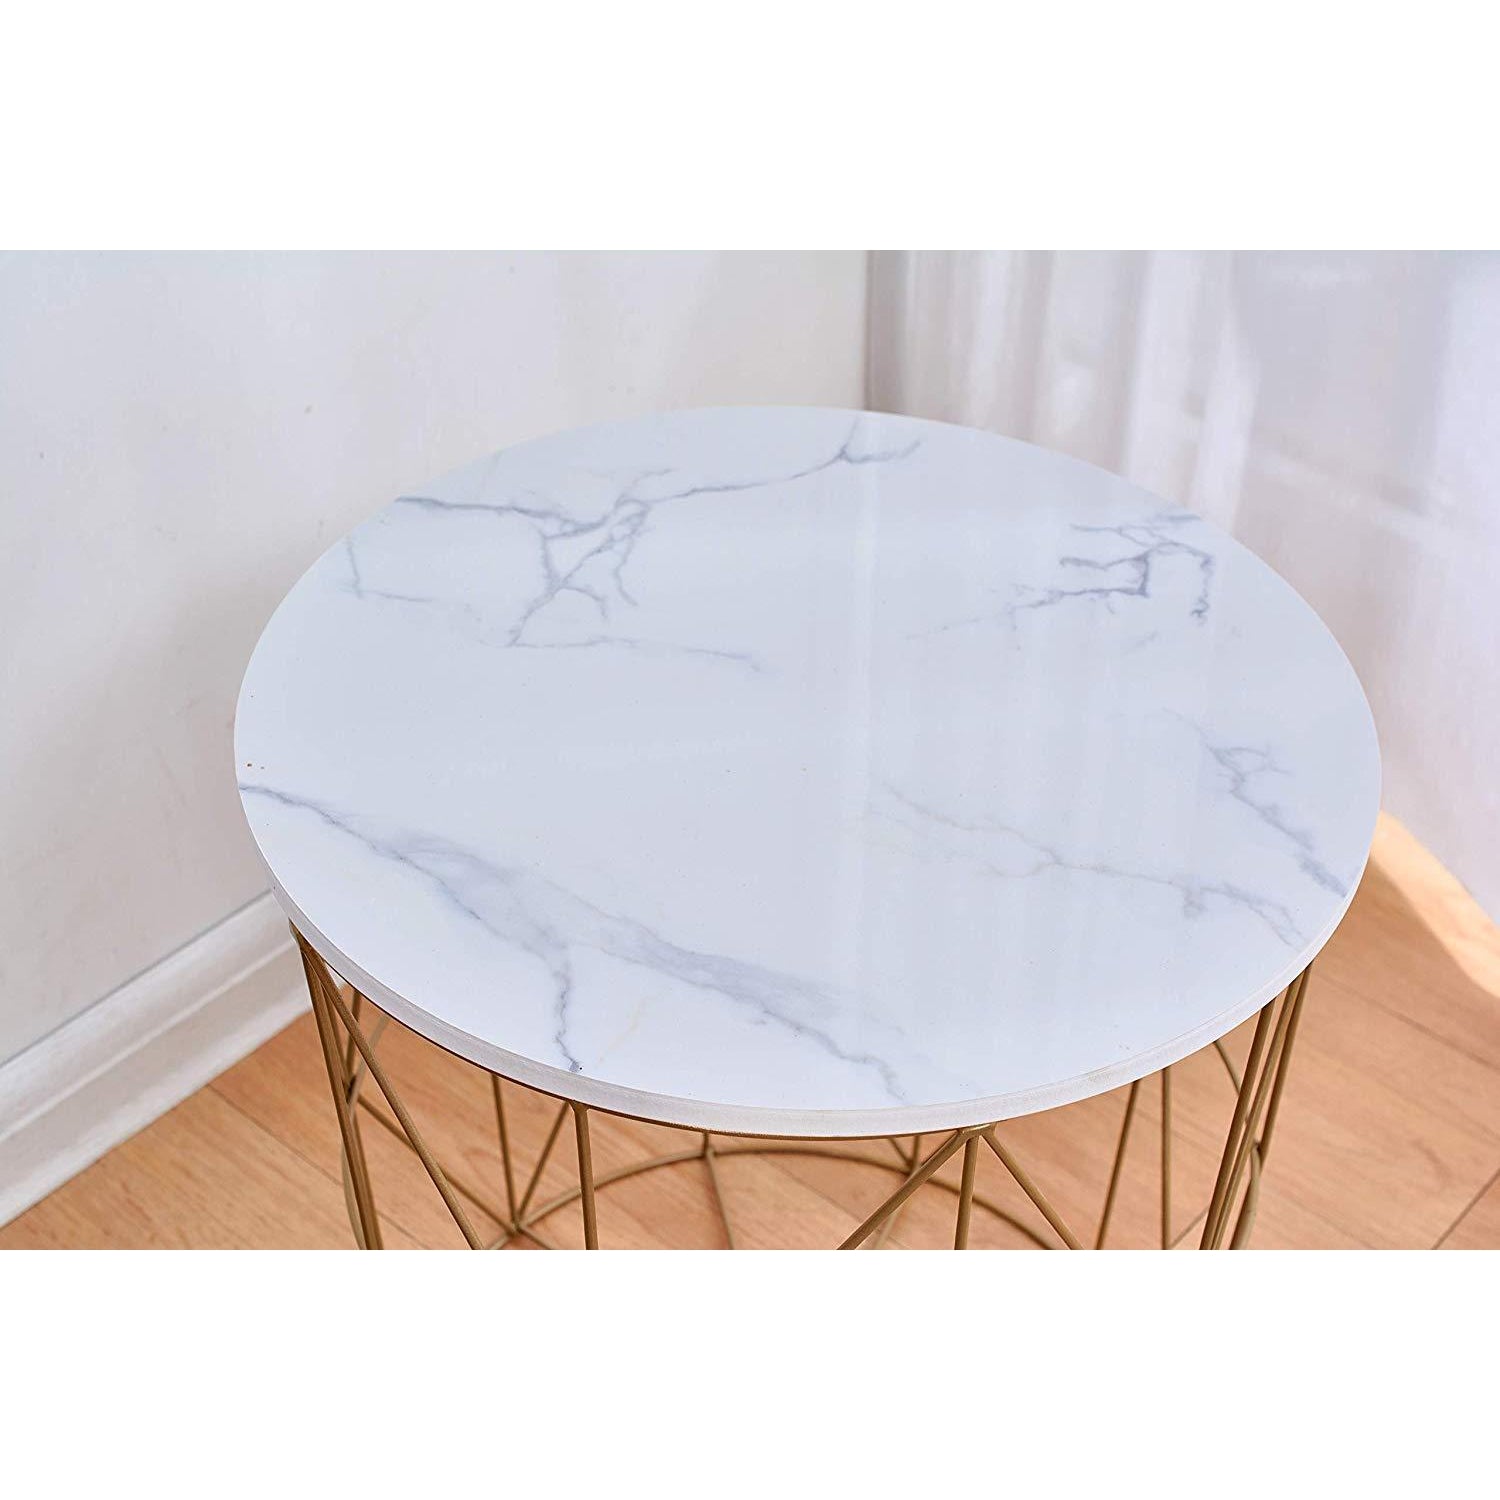 Cherry Tree Furniture KORAM Marble Effect Top Basket Side Table Golden Geometric Wire Frame End Table